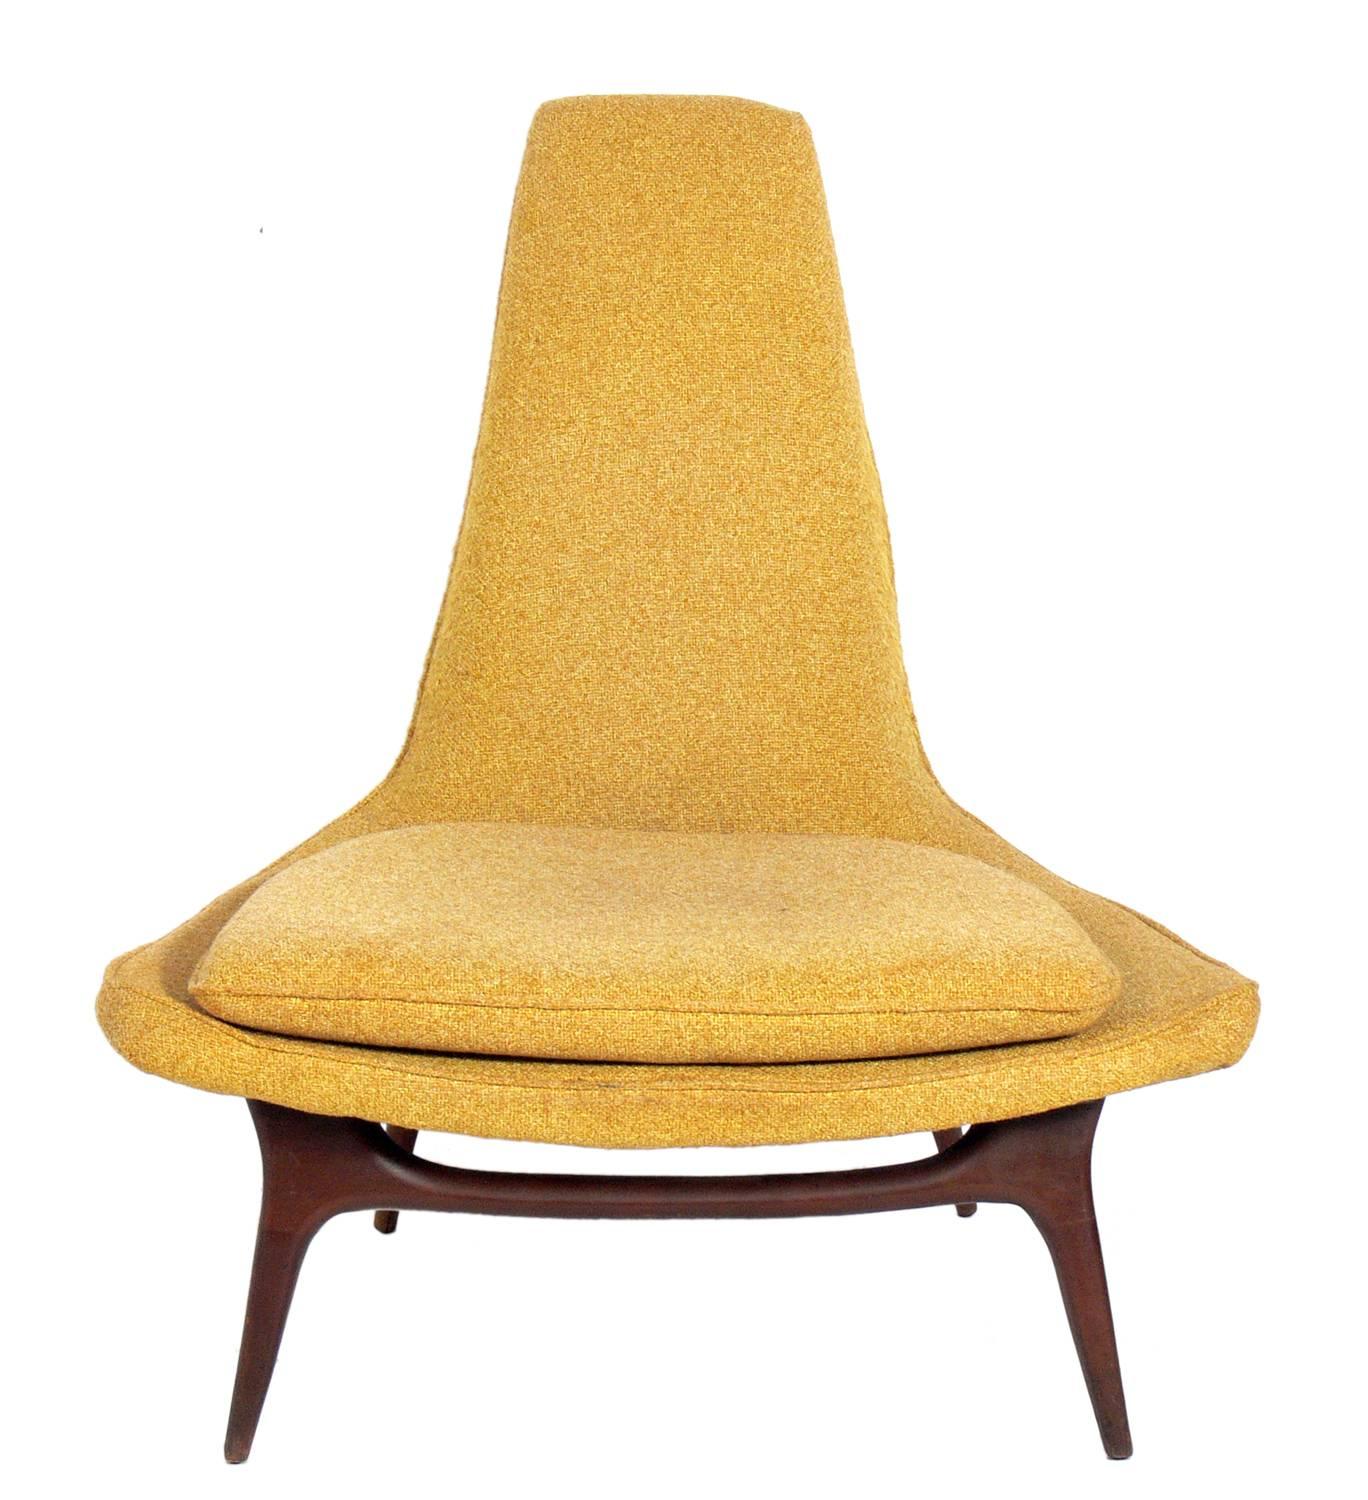 Pair of sculptural Mid-Century Modern lounge chairs by Karpen, American, circa 1960s. These chairs are currently being reupholstered and refinished and can be finished in your choice of color to the wood and reupholstered in your fabric. The price